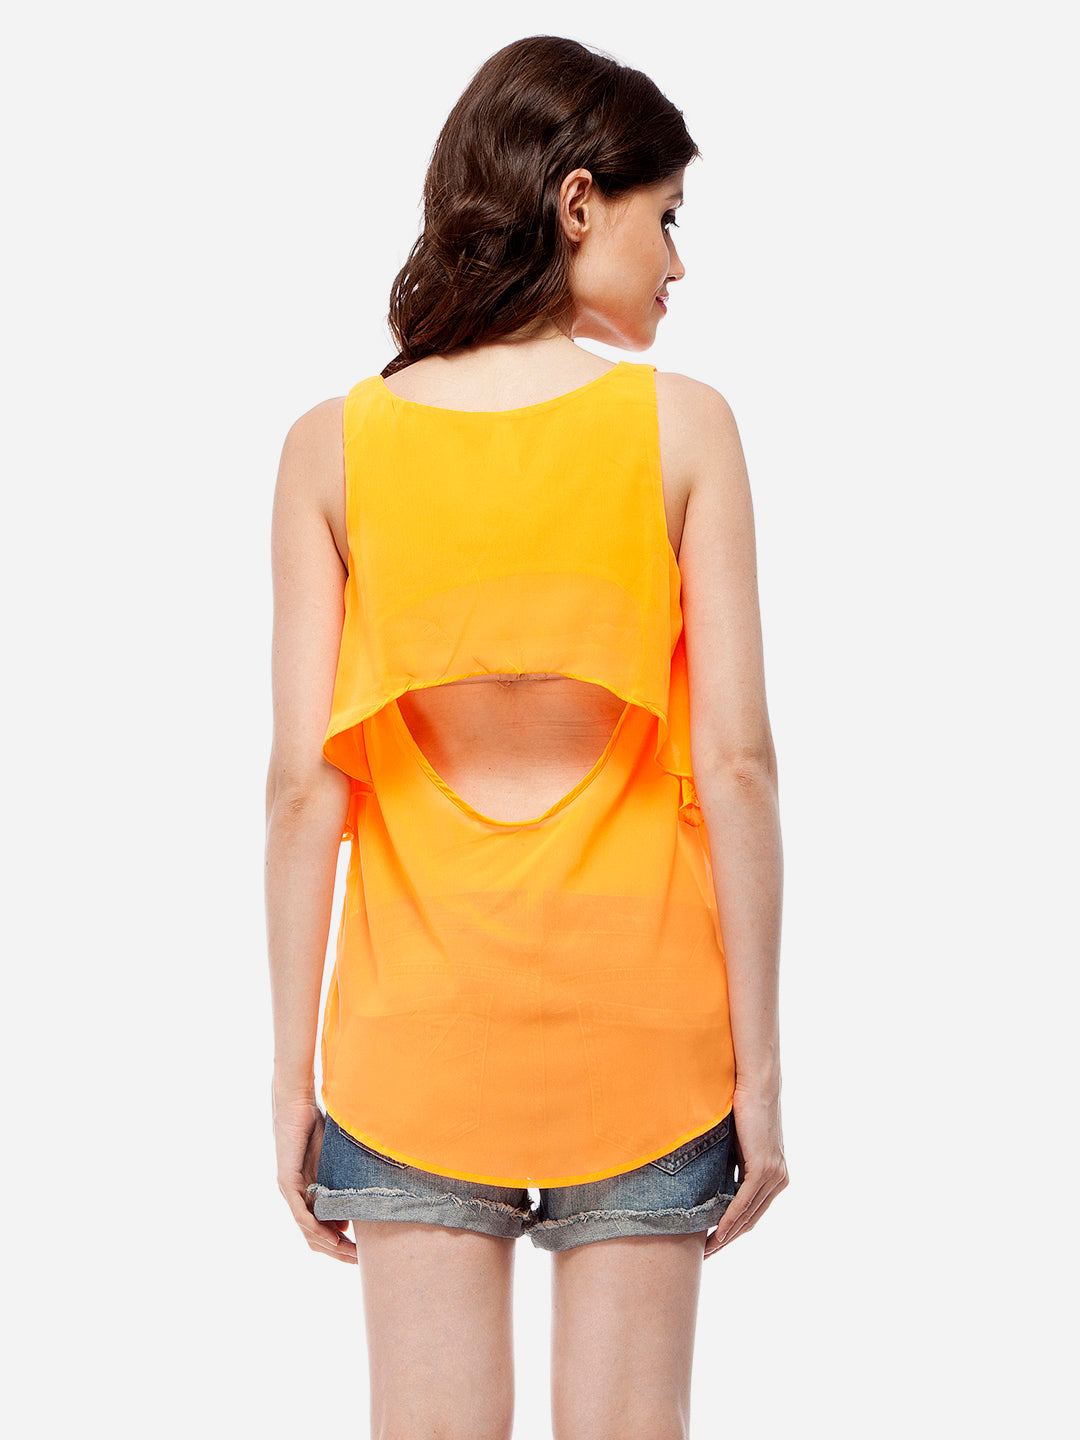 Women's Backless Orange Layer Polyester Top